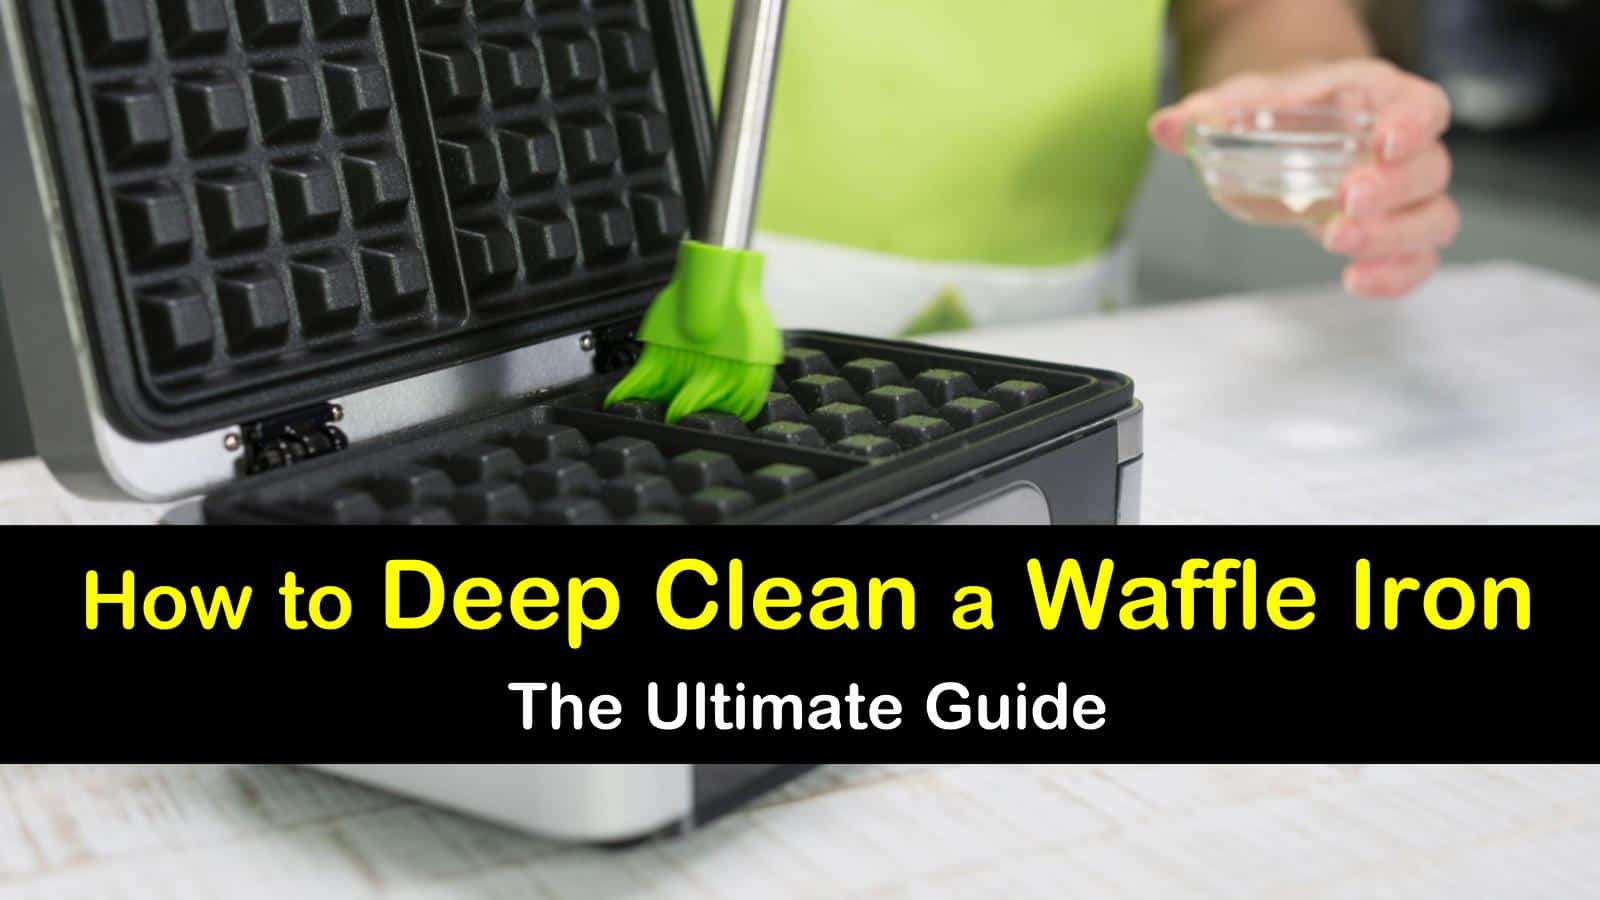 5+ Brilliant Ways to Deep Clean a Waffle Iron